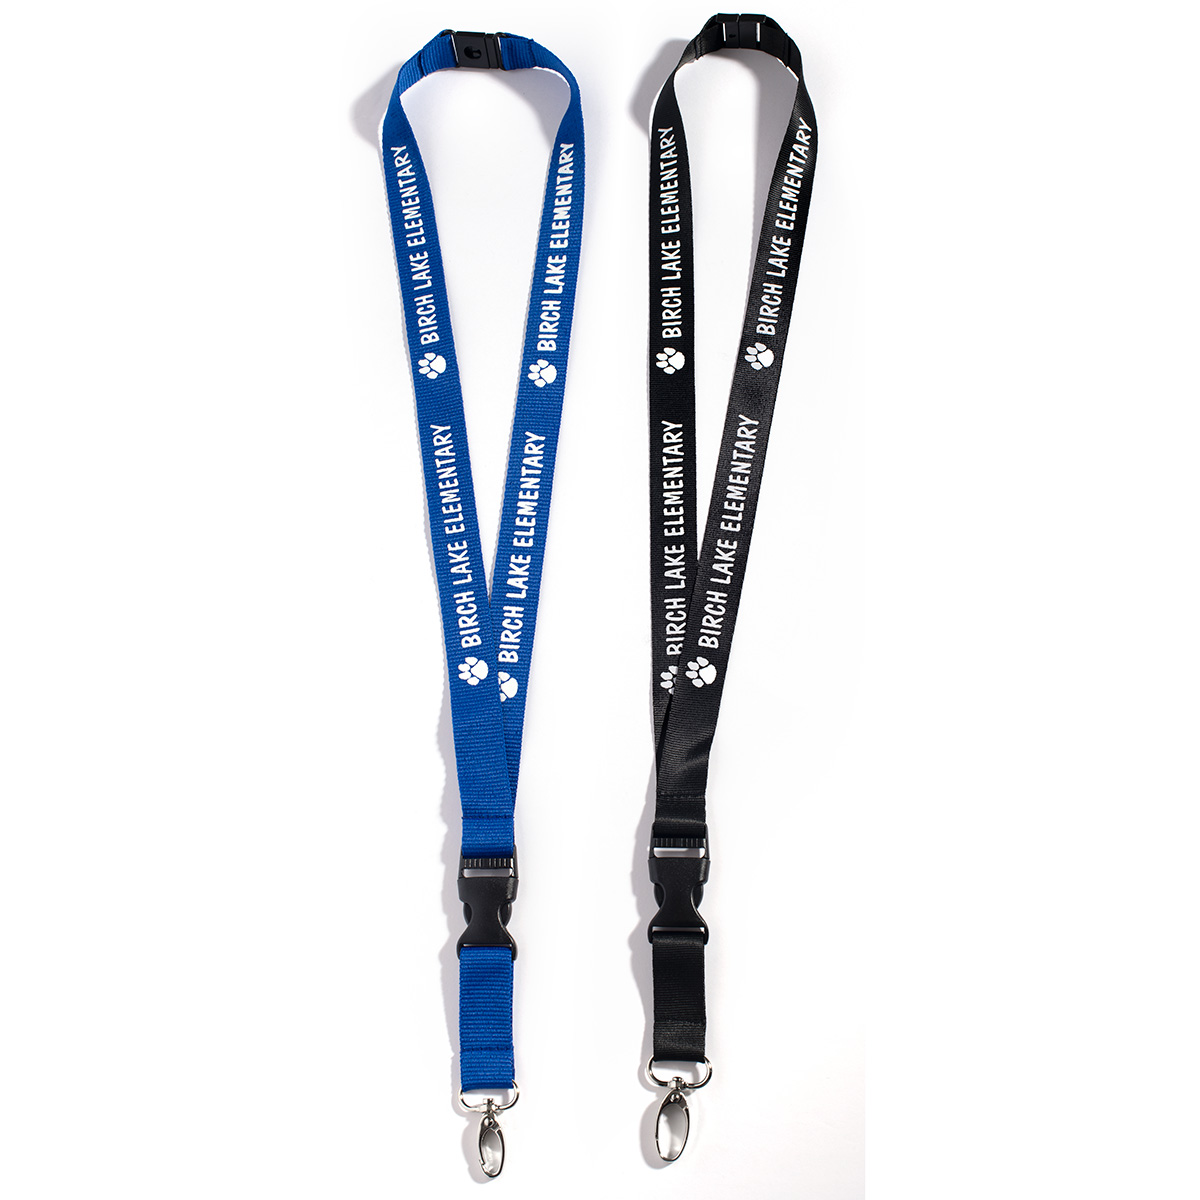 https://www.itselementary.com/-/media/Products/ie/school-spirit/neck-straps-lanyards-and-id-holders/custom-lanyards-and-neck-straps/elly6-smooth-neck-strap-with-j-hook-and-safety-release-000.ashx